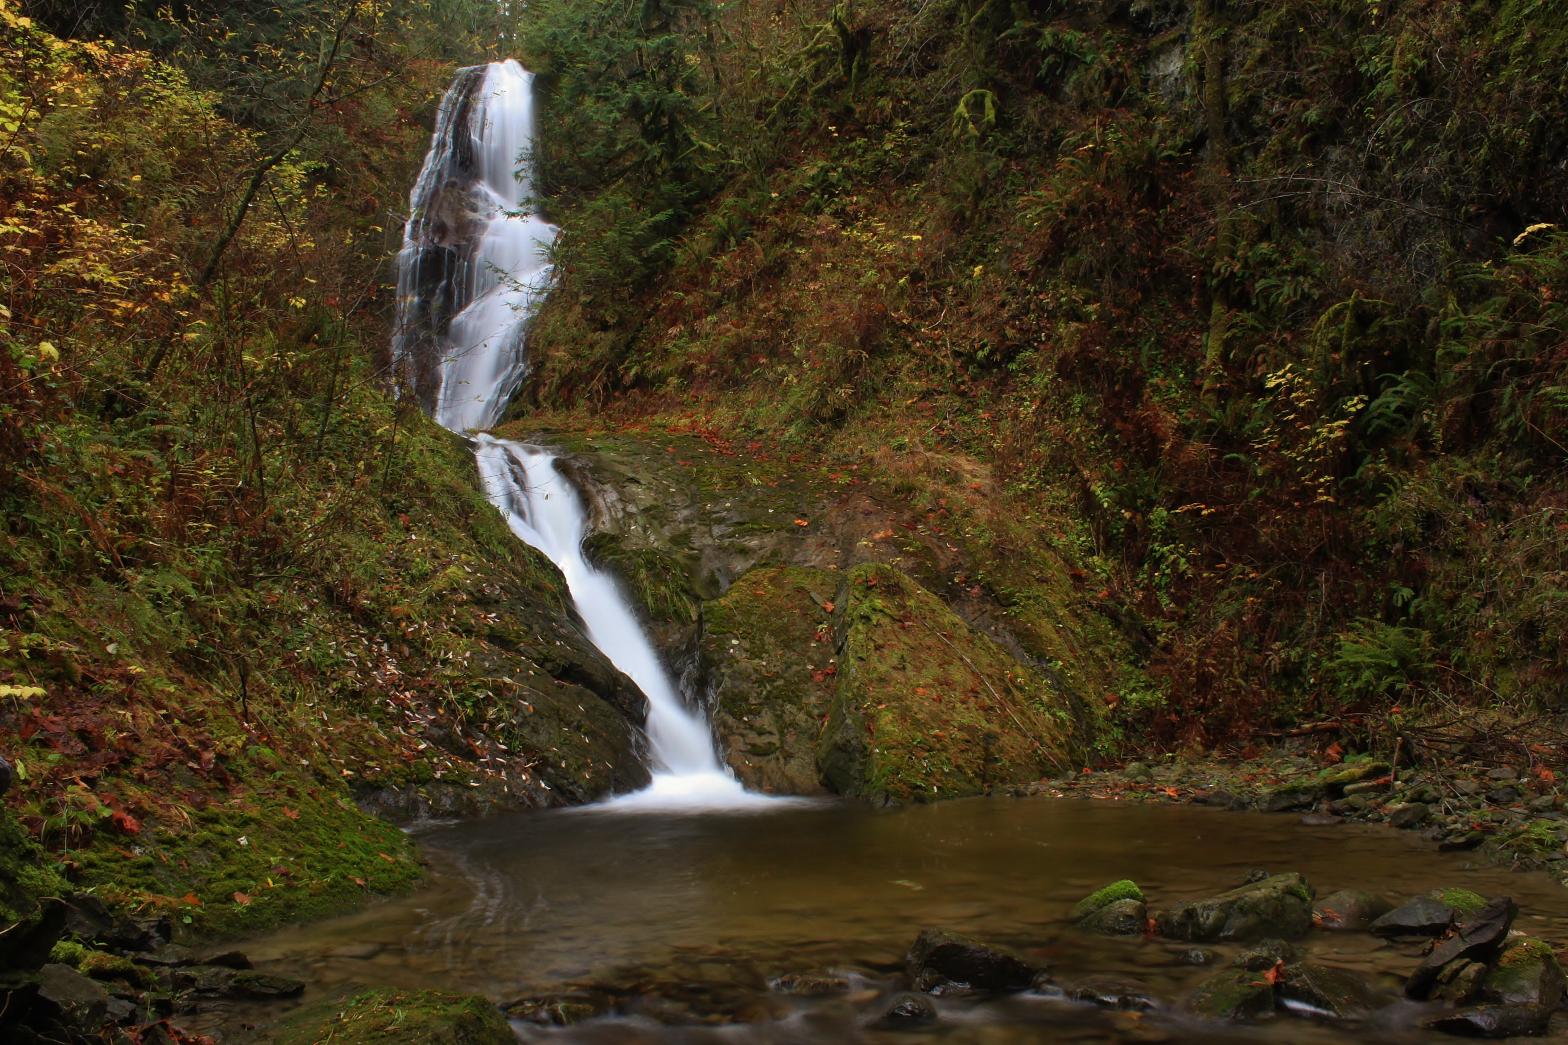 View of both tiers of the falls